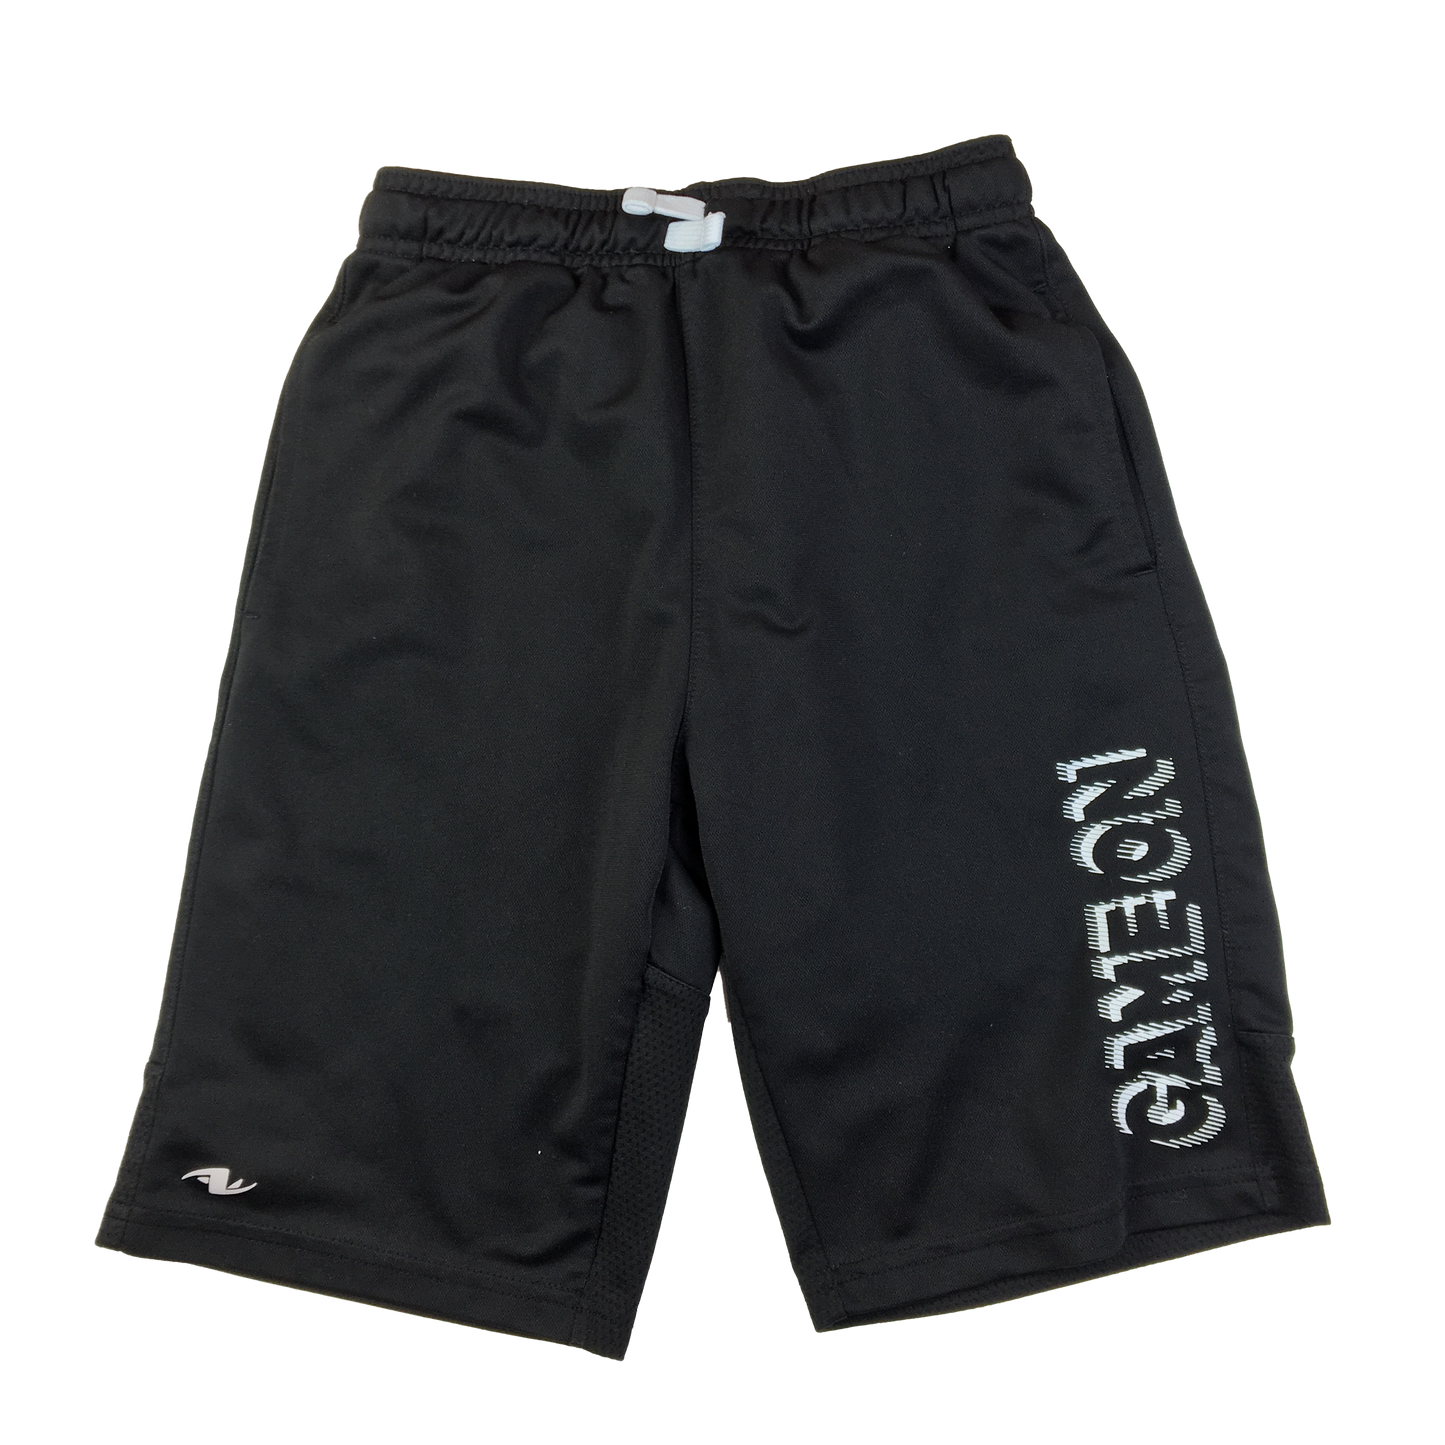 Athletic Works Black Shorts with "Game On" Decal 14-16